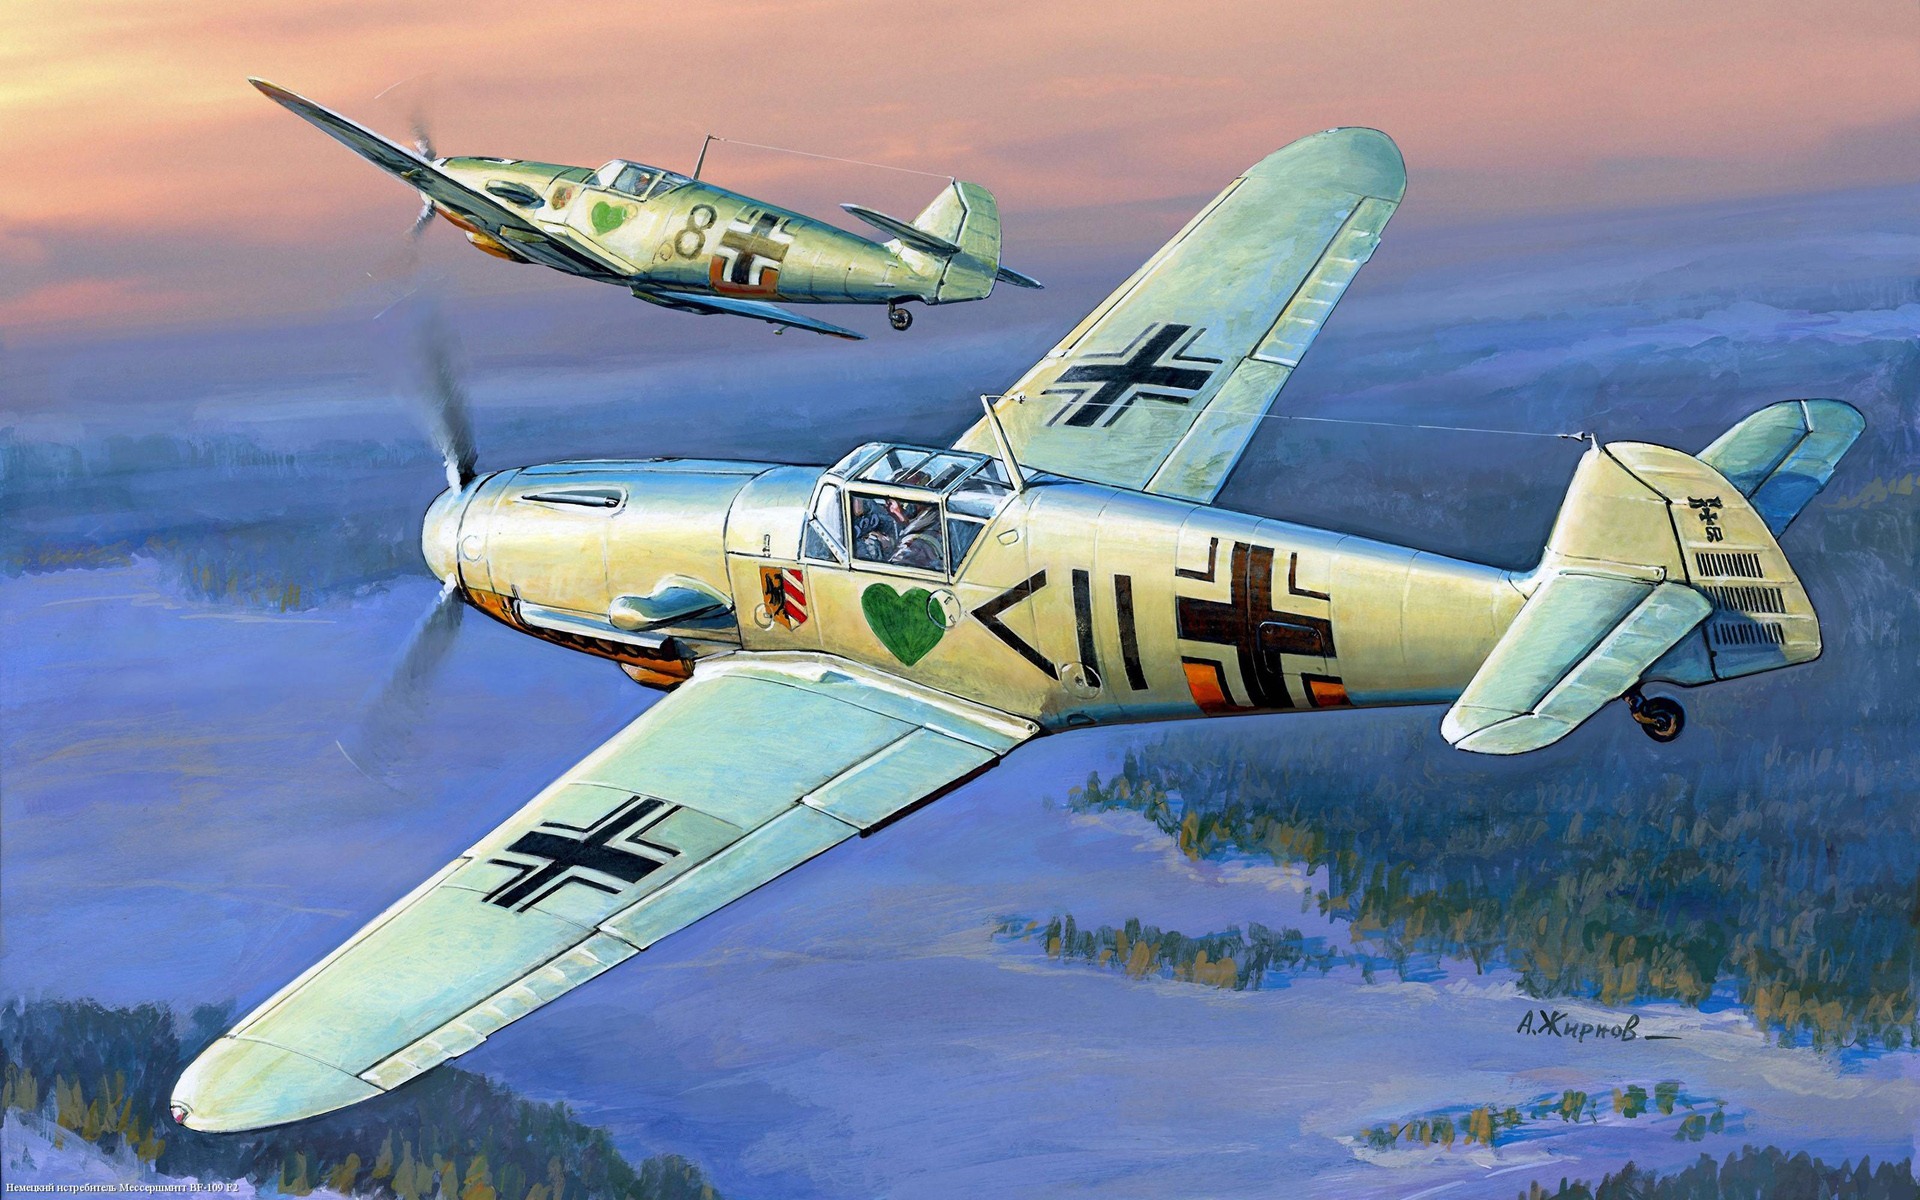 Military aircraft flight exquisite painting wallpapers #12 - 1920x1200